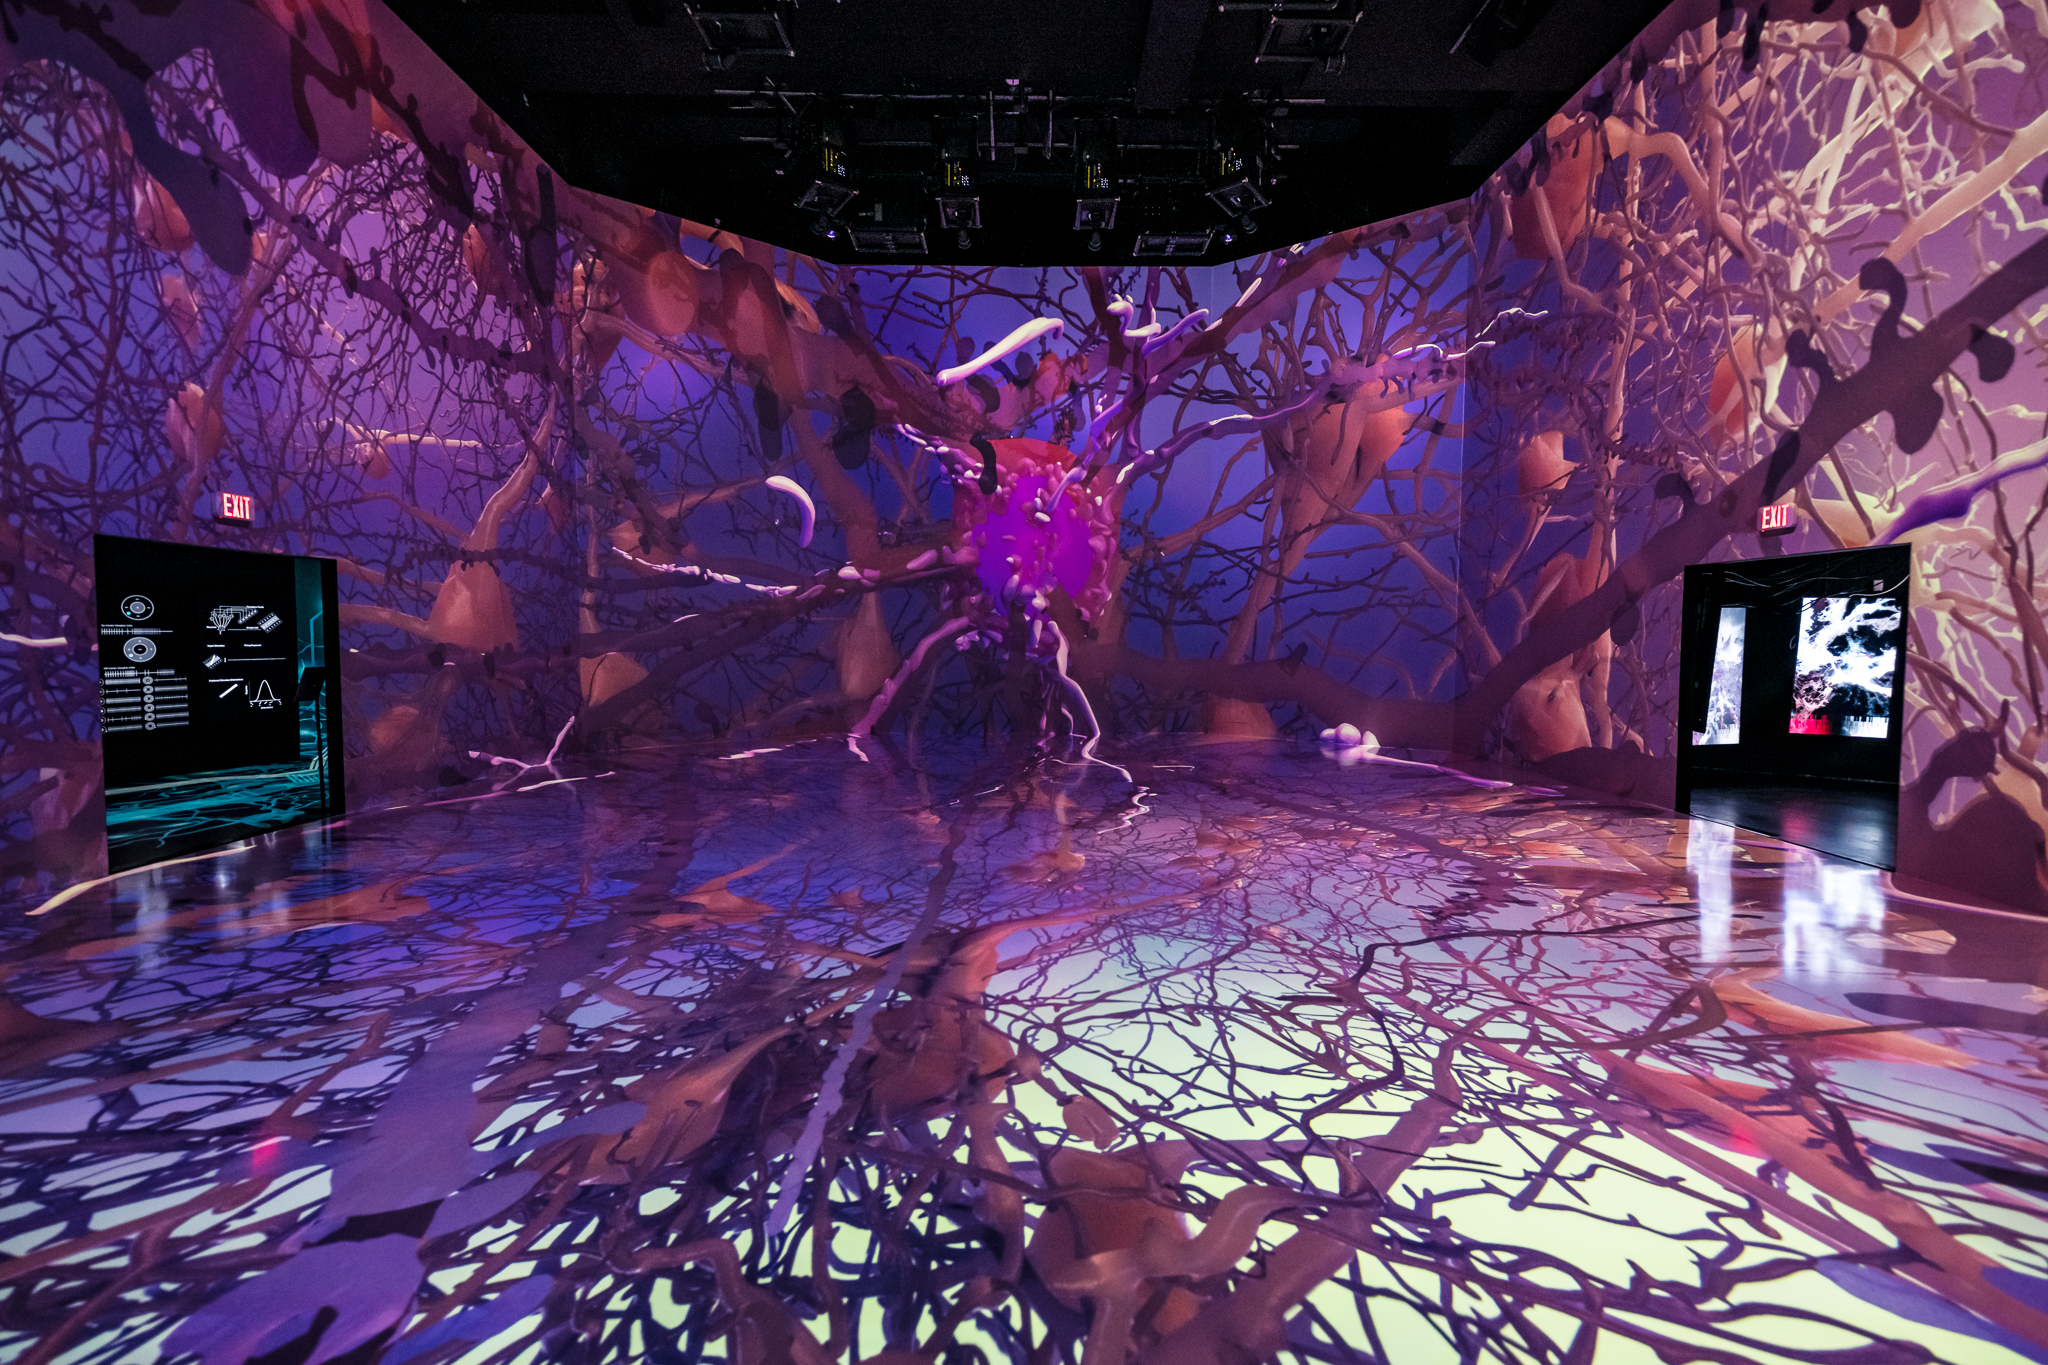 Image of the main exhibit of the SfN ARTECHOUSE collaboration in Washington D.C.